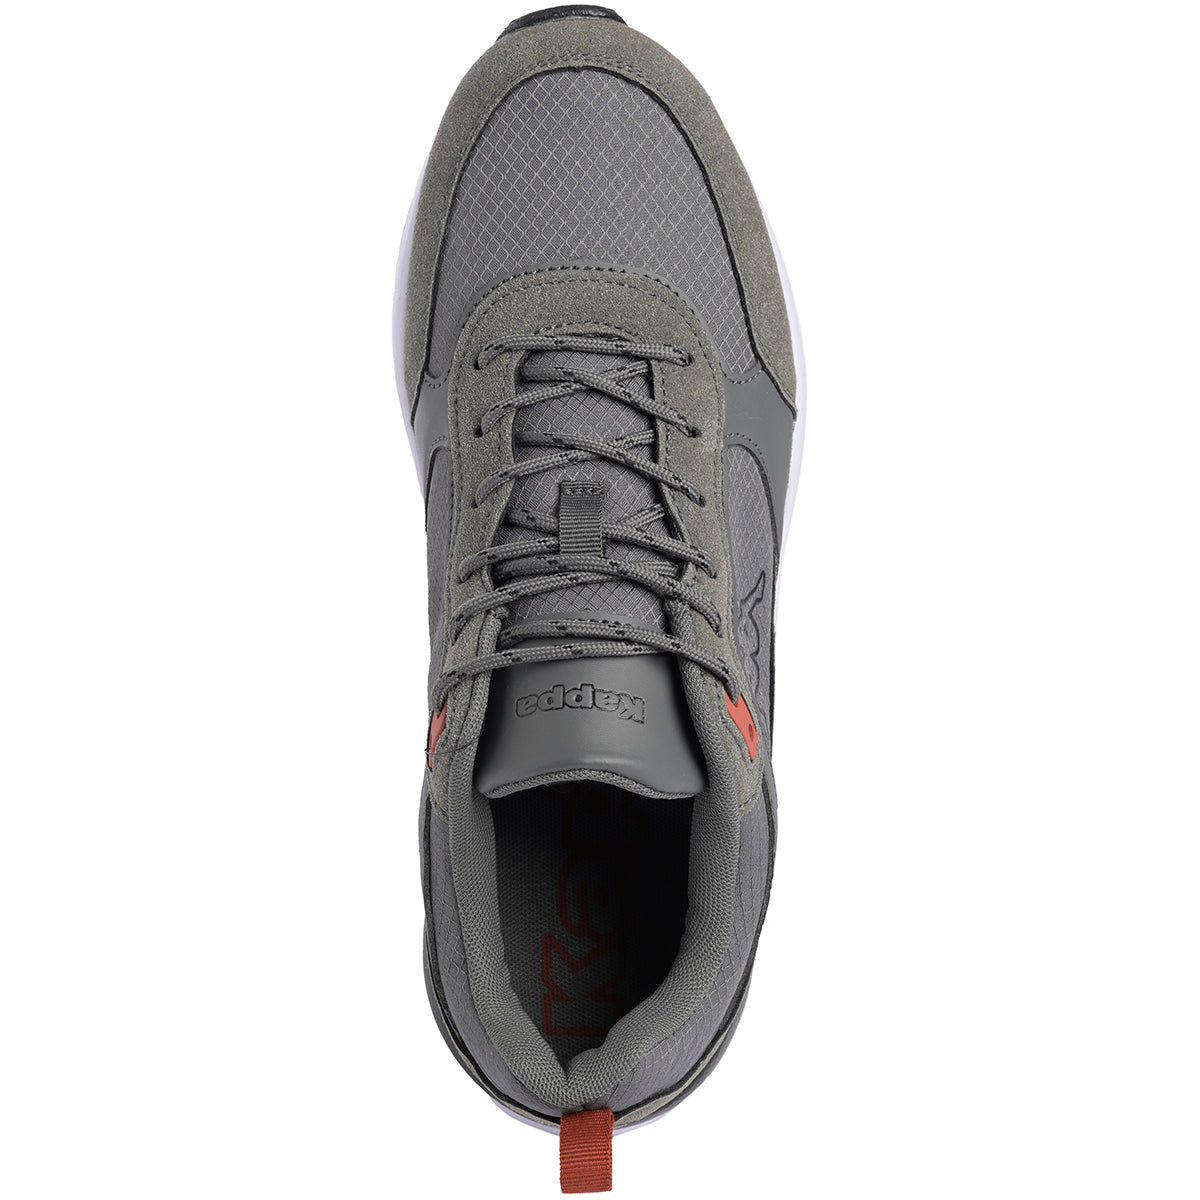 Sneakers Brady NY gris homme - Image 4